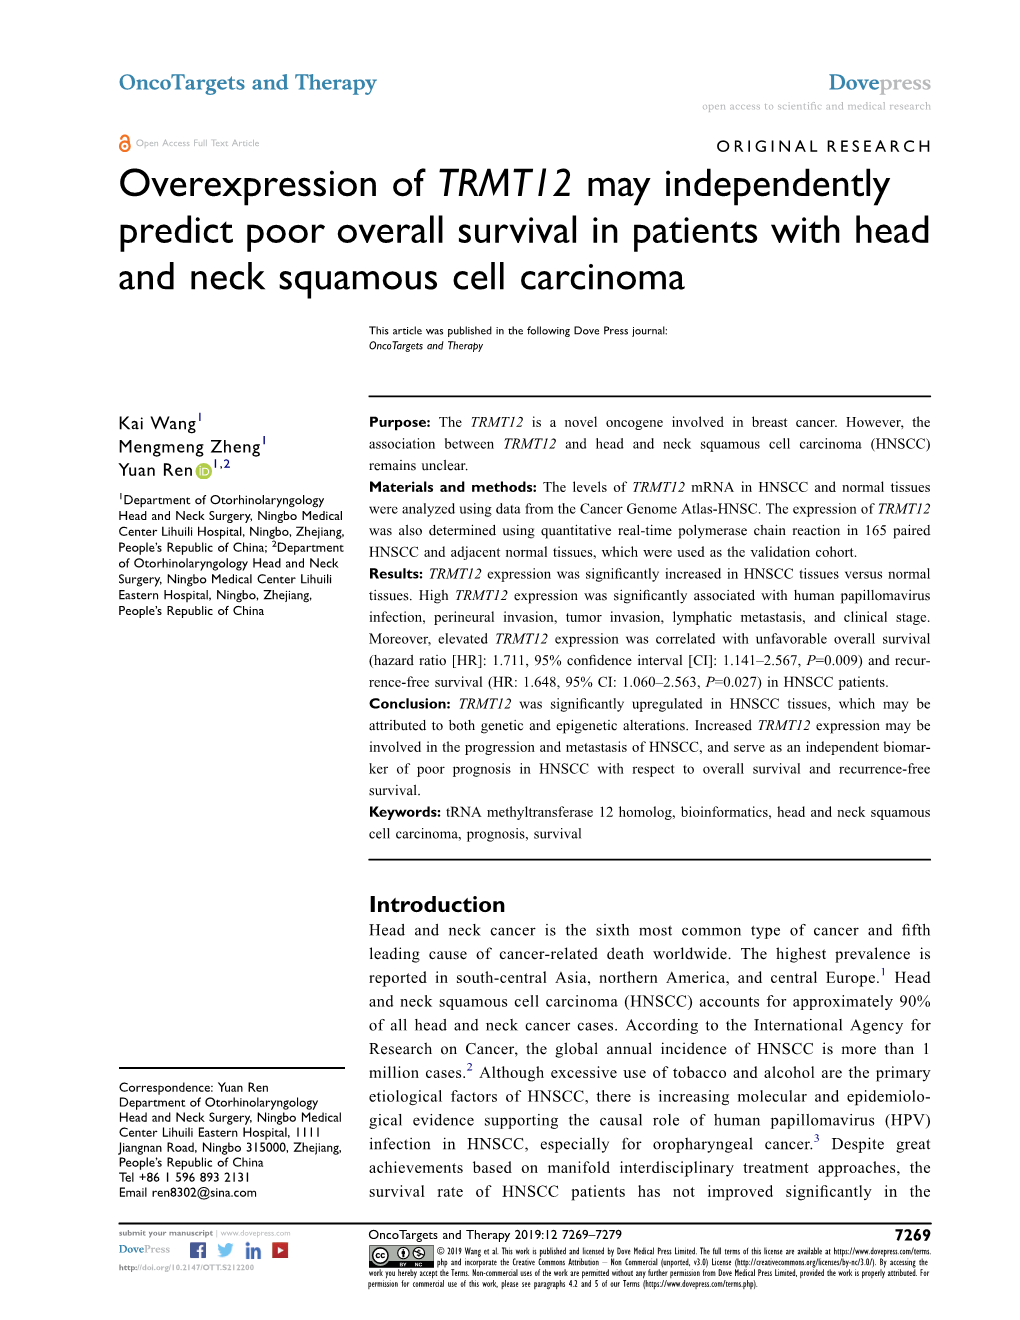 Overexpression of TRMT12 May Independently Predict Poor Overall Survival in Patients with Head and Neck Squamous Cell Carcinoma